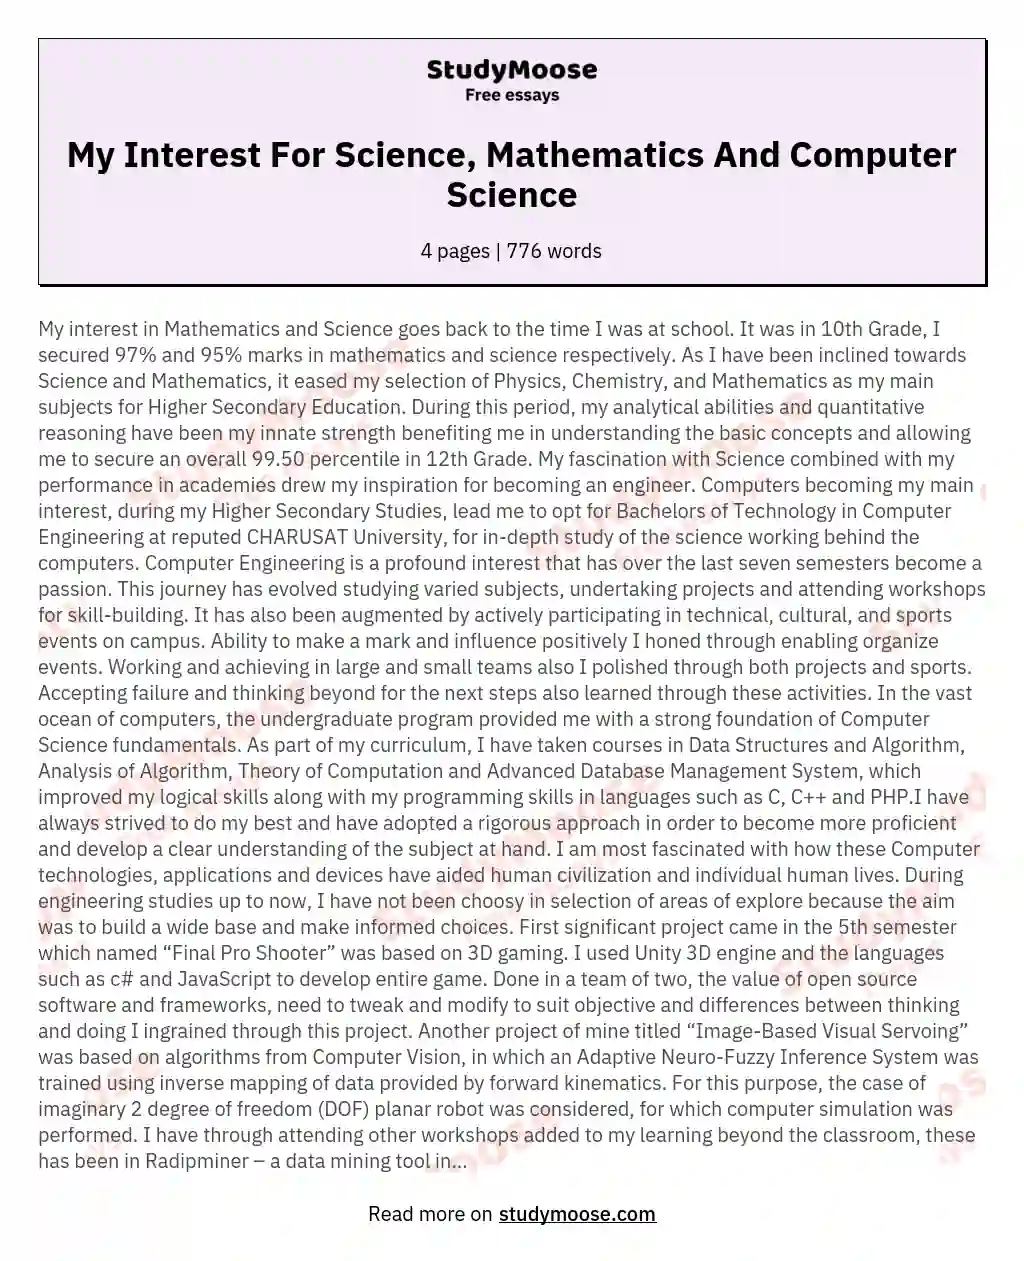 My Interest For Science, Mathematics And Computer Science